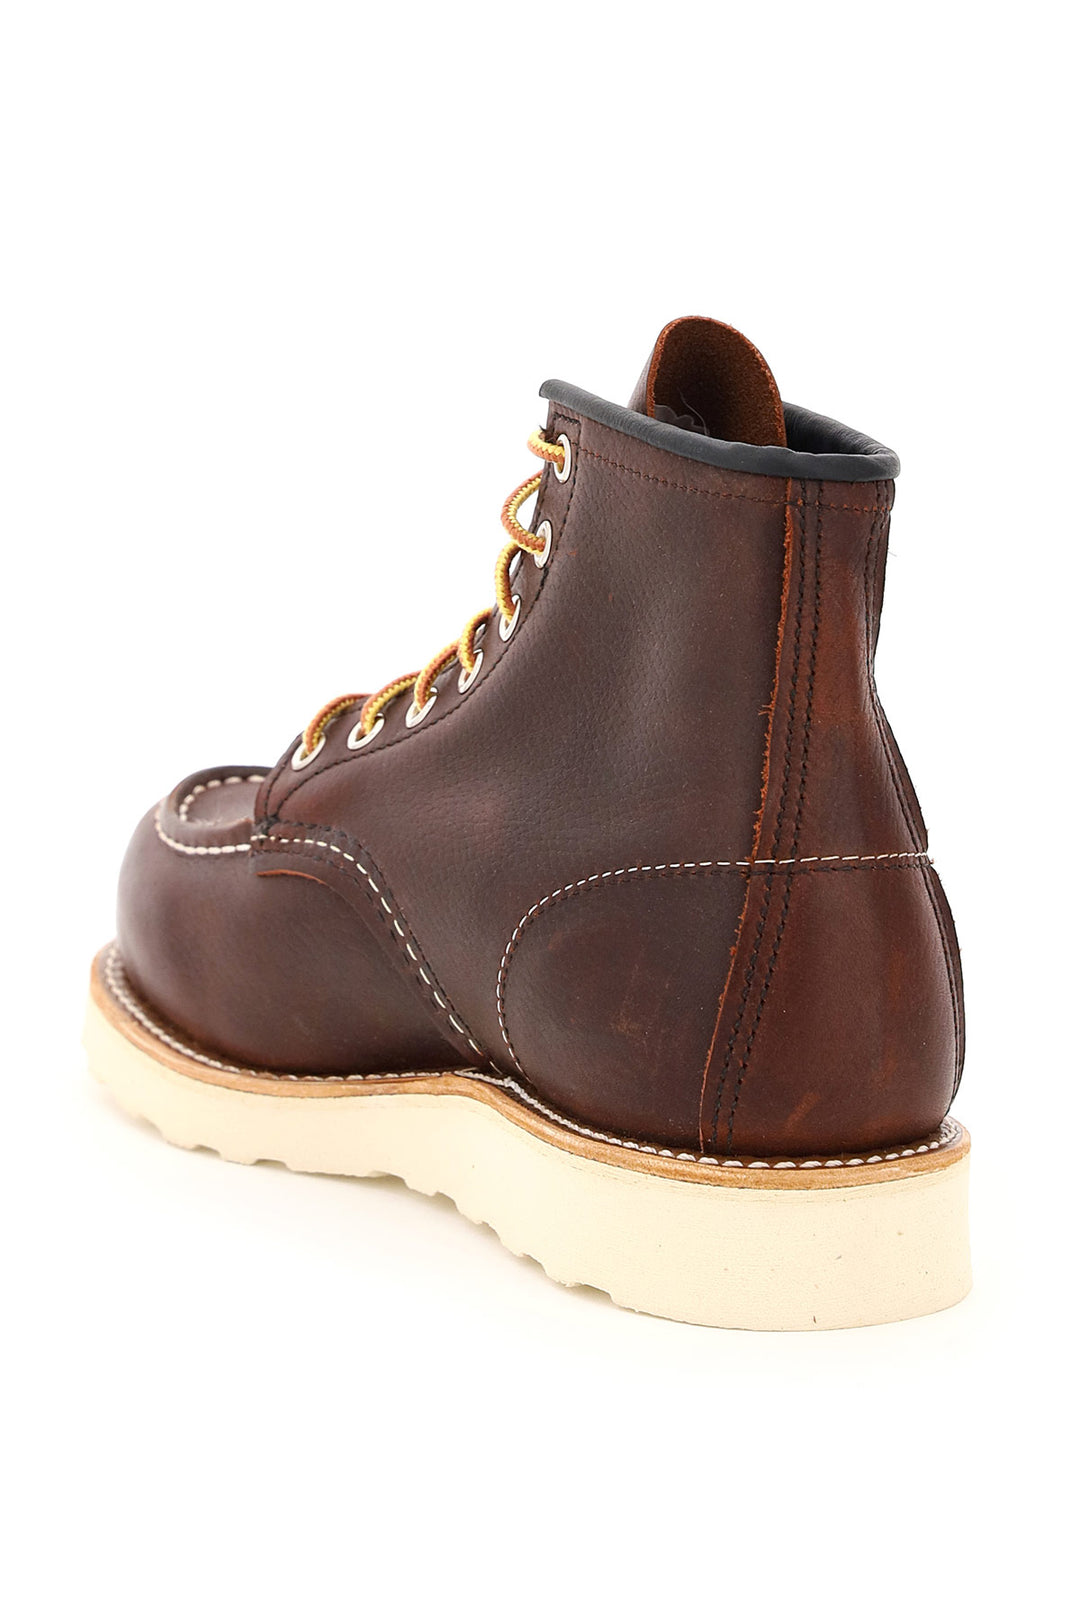 Red Wing Shoes Classic Moc Ankle Boots   Marrone